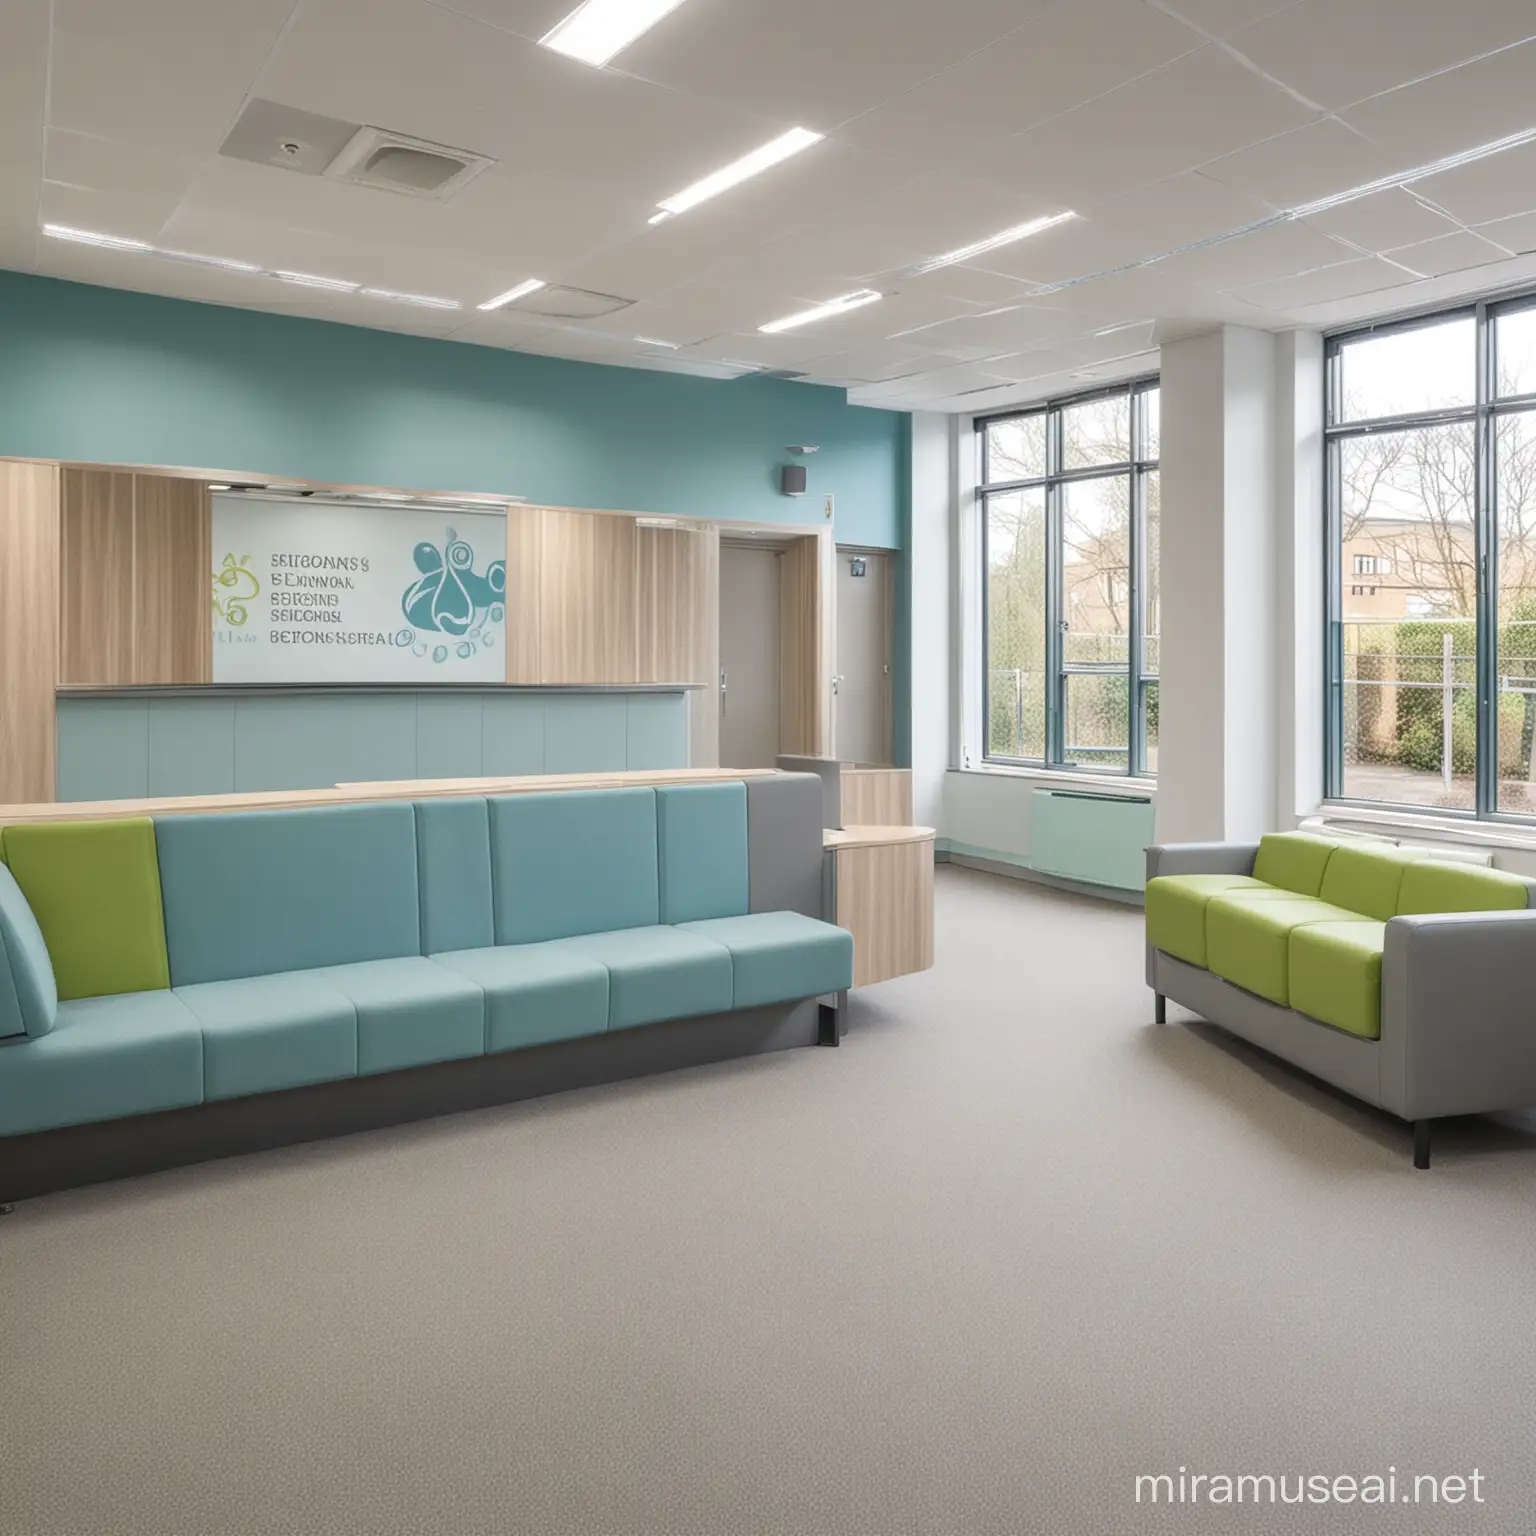 secondary school for children with special educational needs. school reception area with feature seating. colour scheme is grey, light green and light blue.